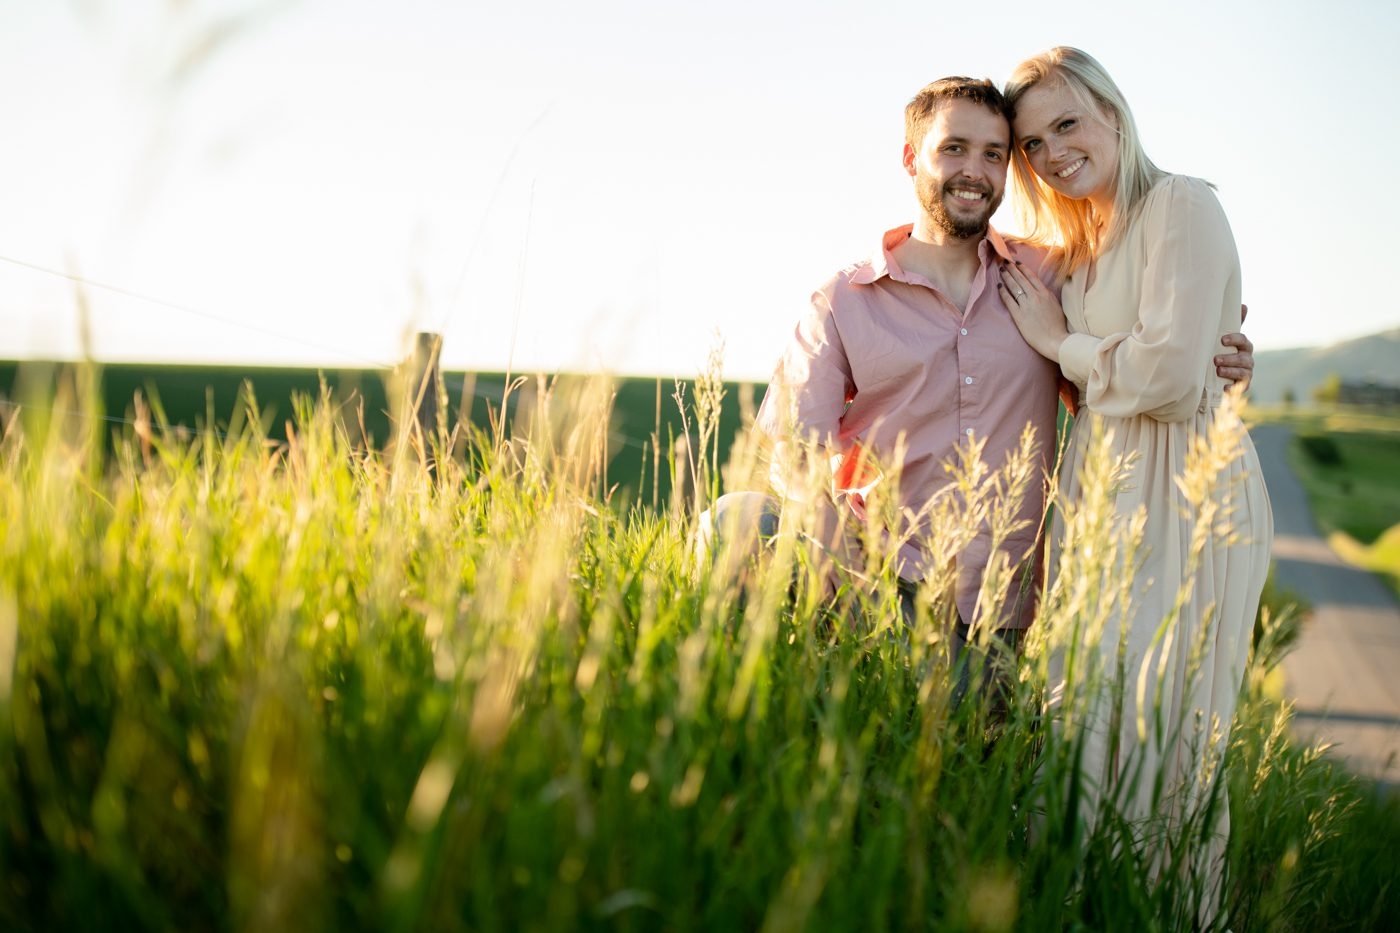 Newly-engaged-couple-in-grassy-field-at-sunset